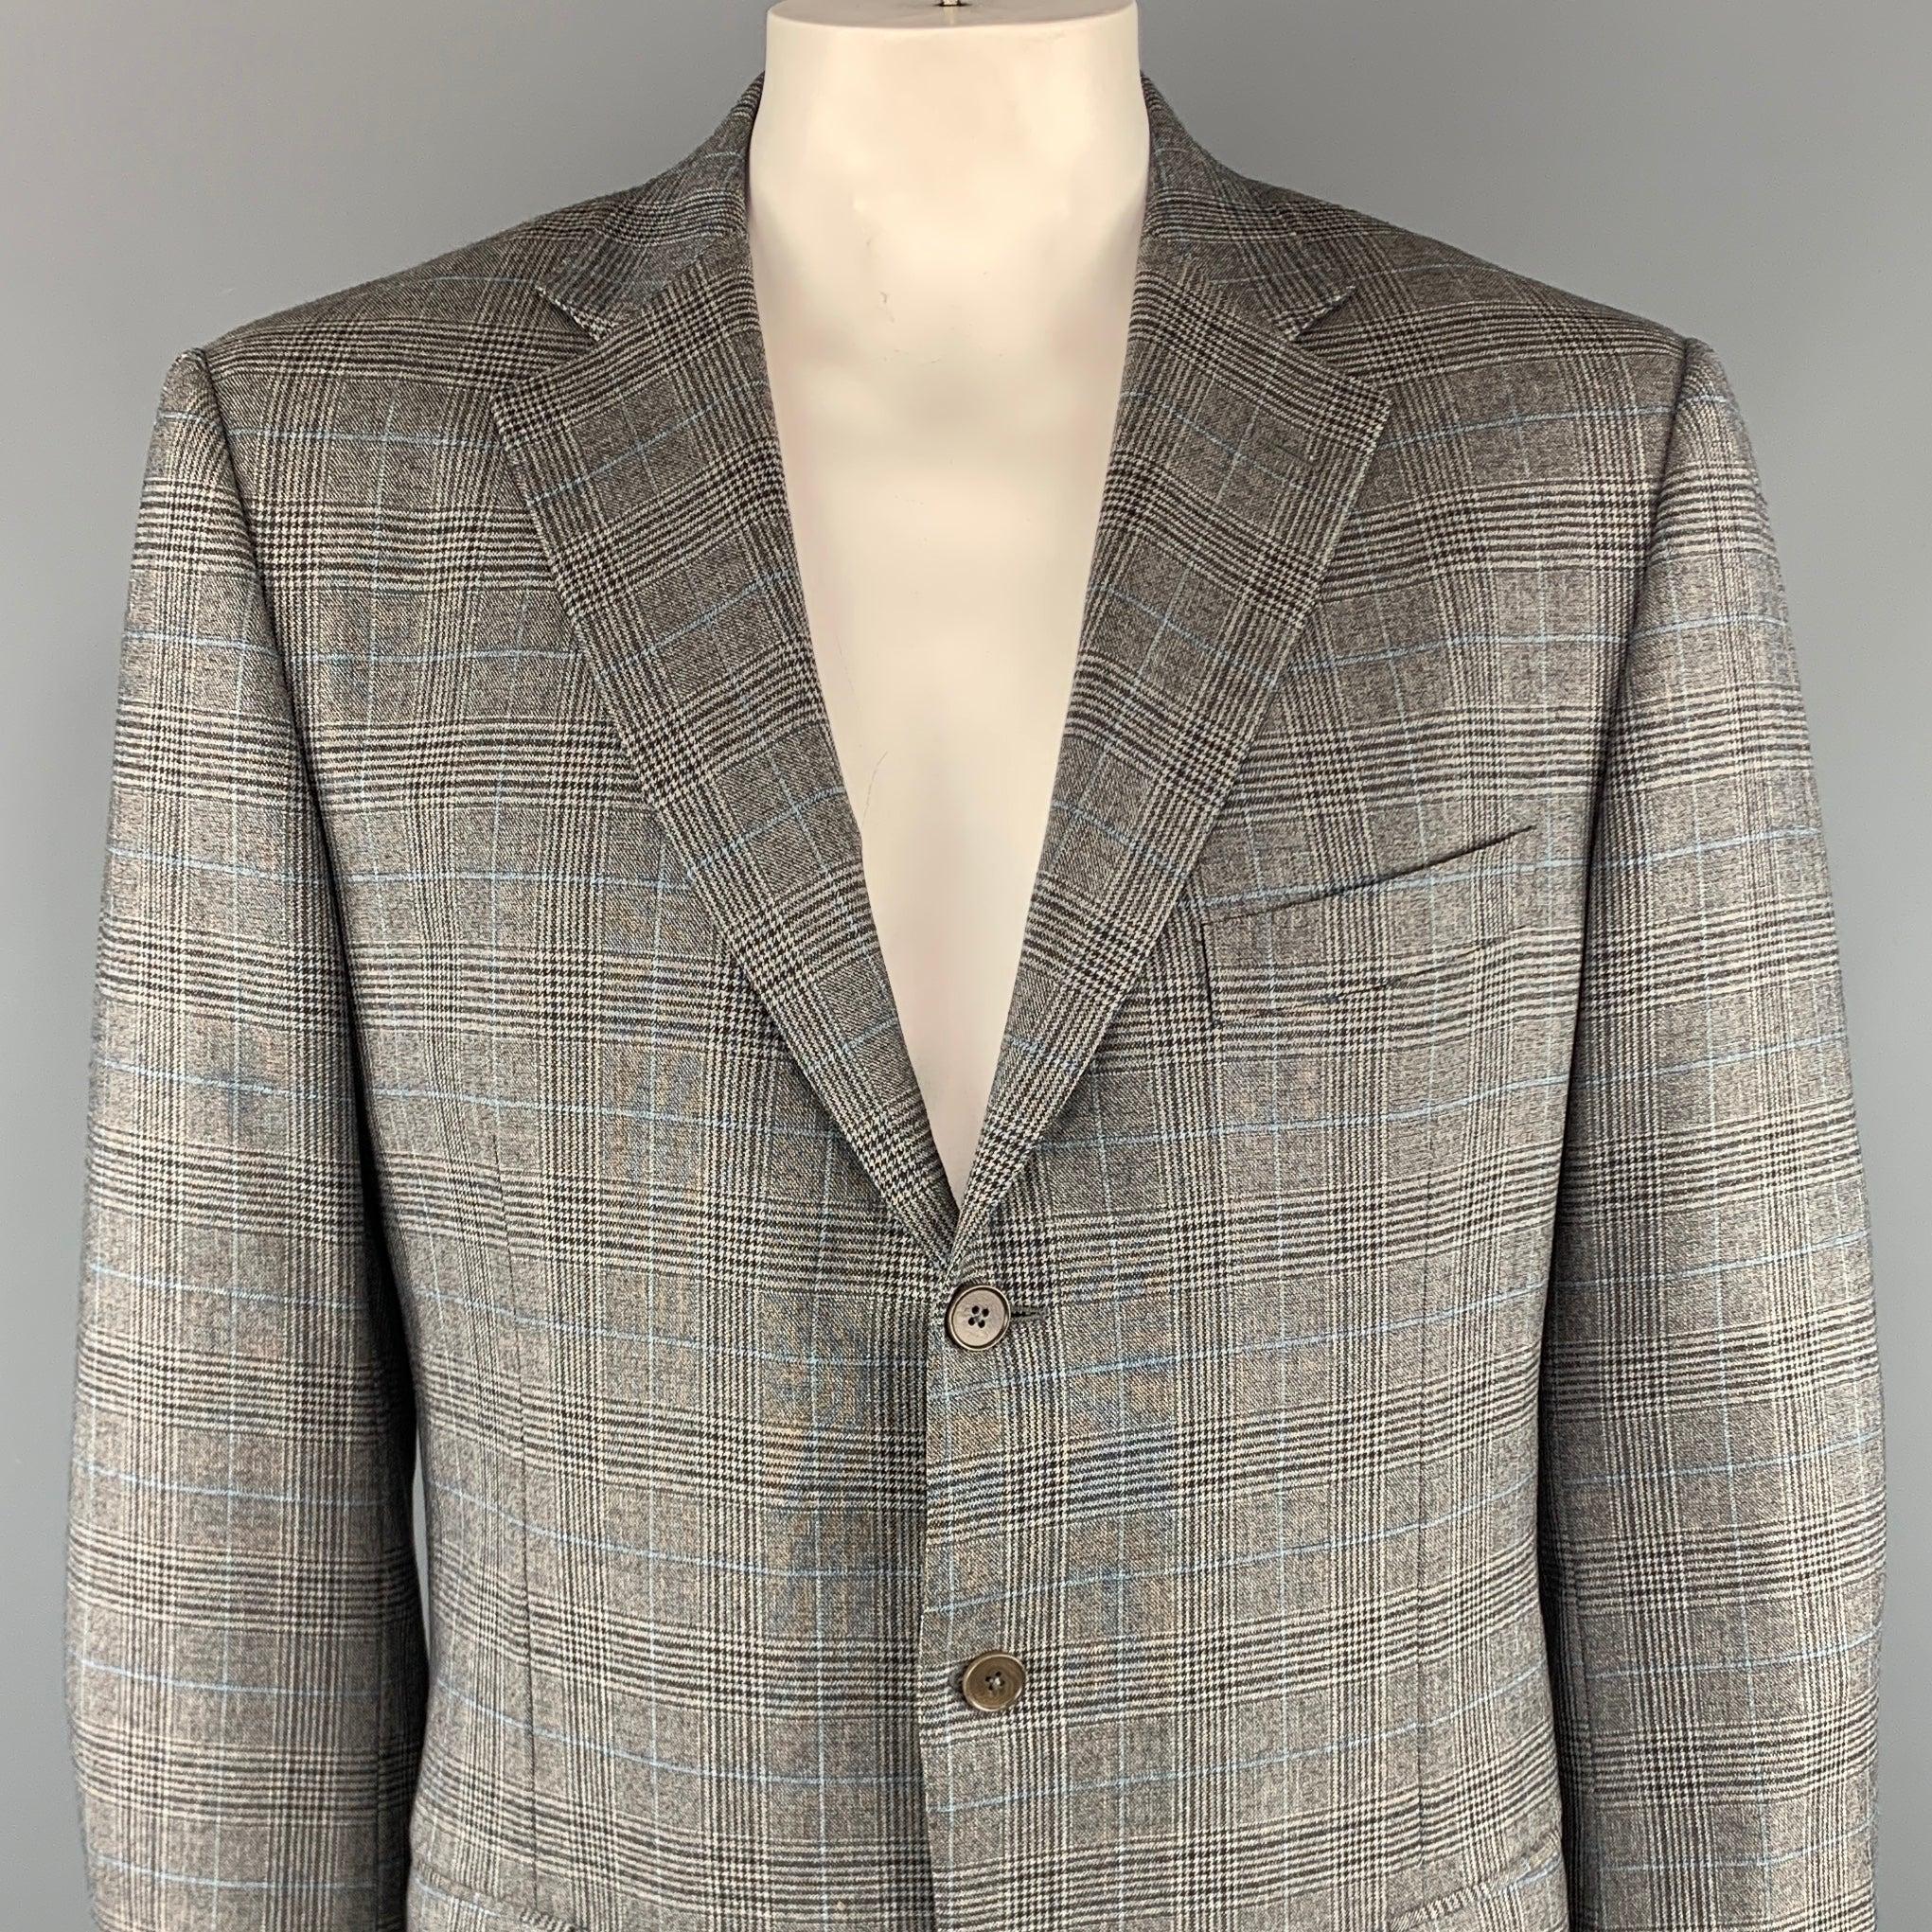 ERMENEGILDO ZEGNA
sport coat comes in a gray plaid wool with a notch lapel, flap pockets, and a three button closure. Made in ItalyExcellent Pre-Owned Condition.
 

Marked:   IT 56 L
 

Measurements: 
 
Shoulder: 19 inches Chest: 40 inches 
Sleeve: